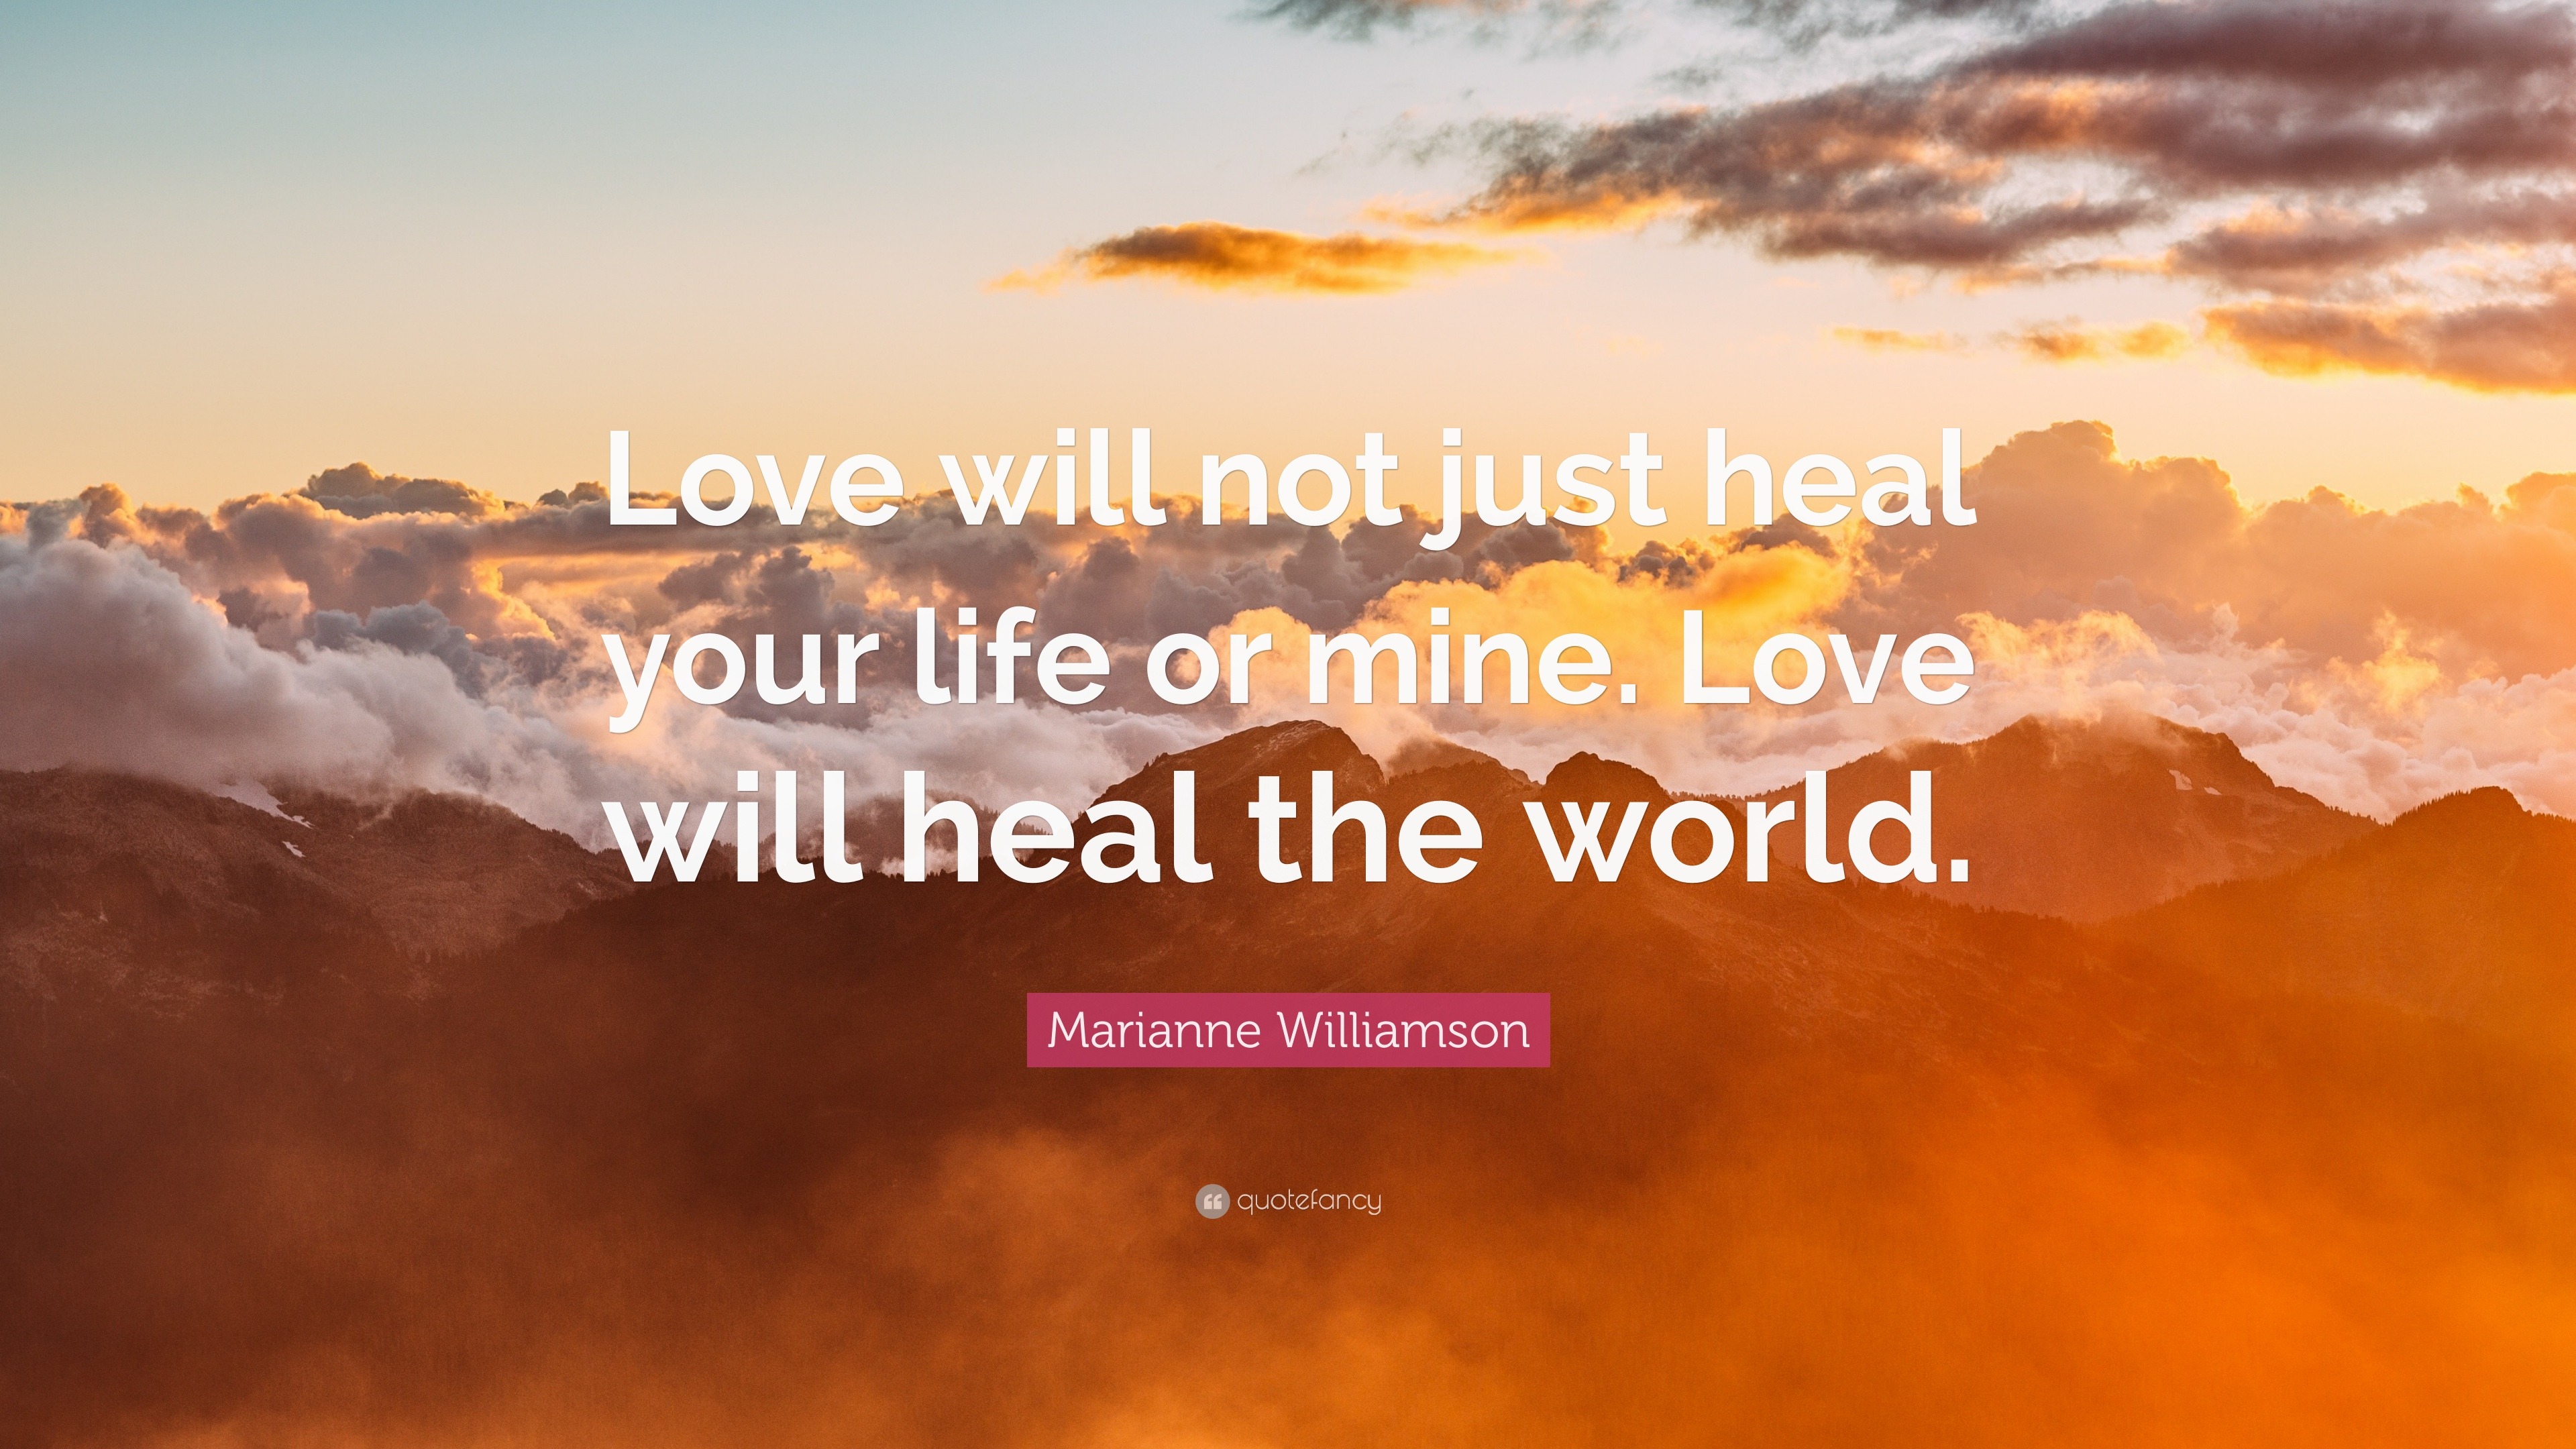 Marianne Williamson Quote “Love will not just heal your life or mine Love